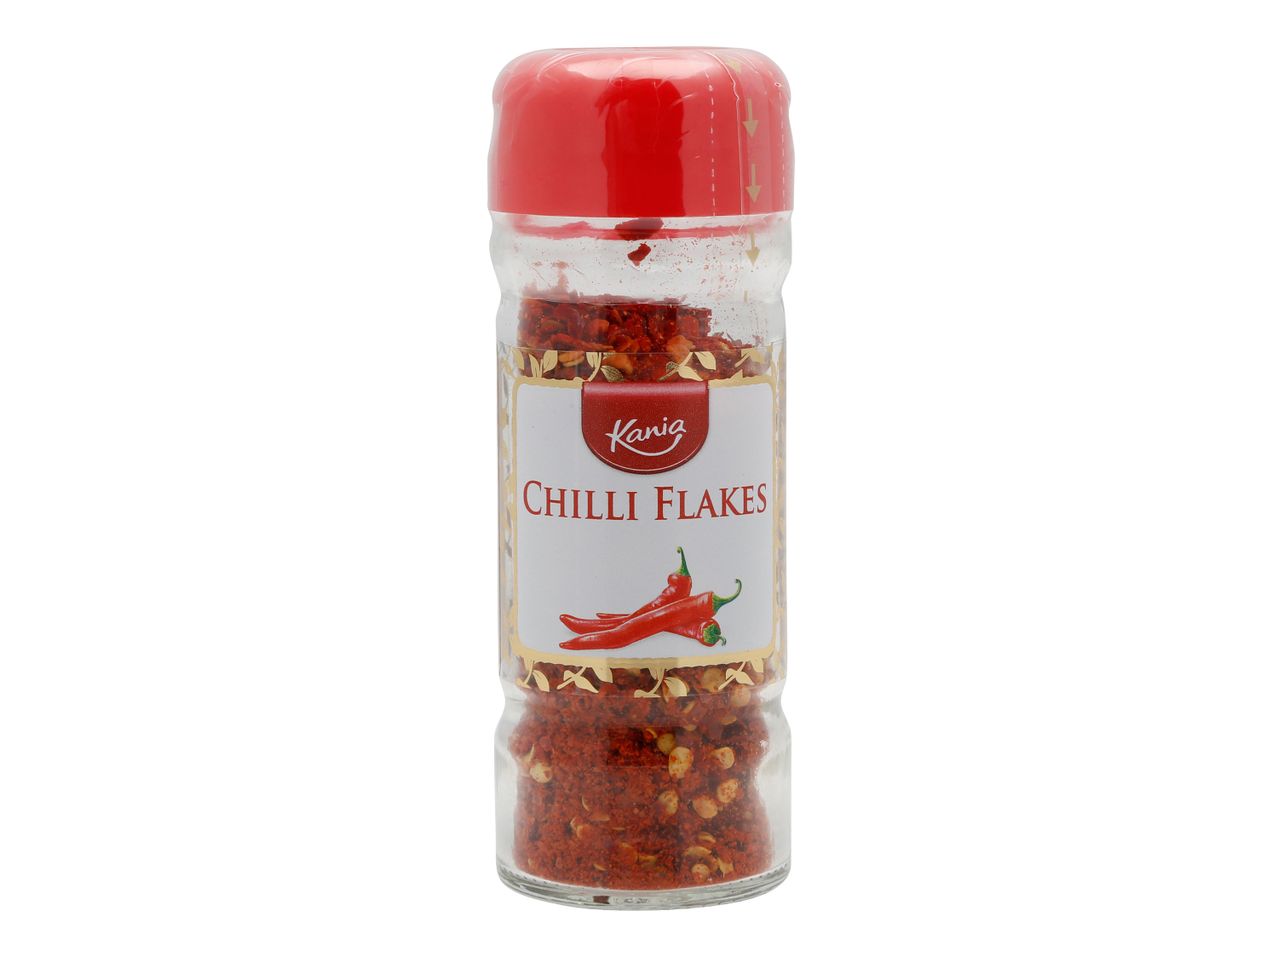 Go to full screen view: Chilli Flakes - Image 1